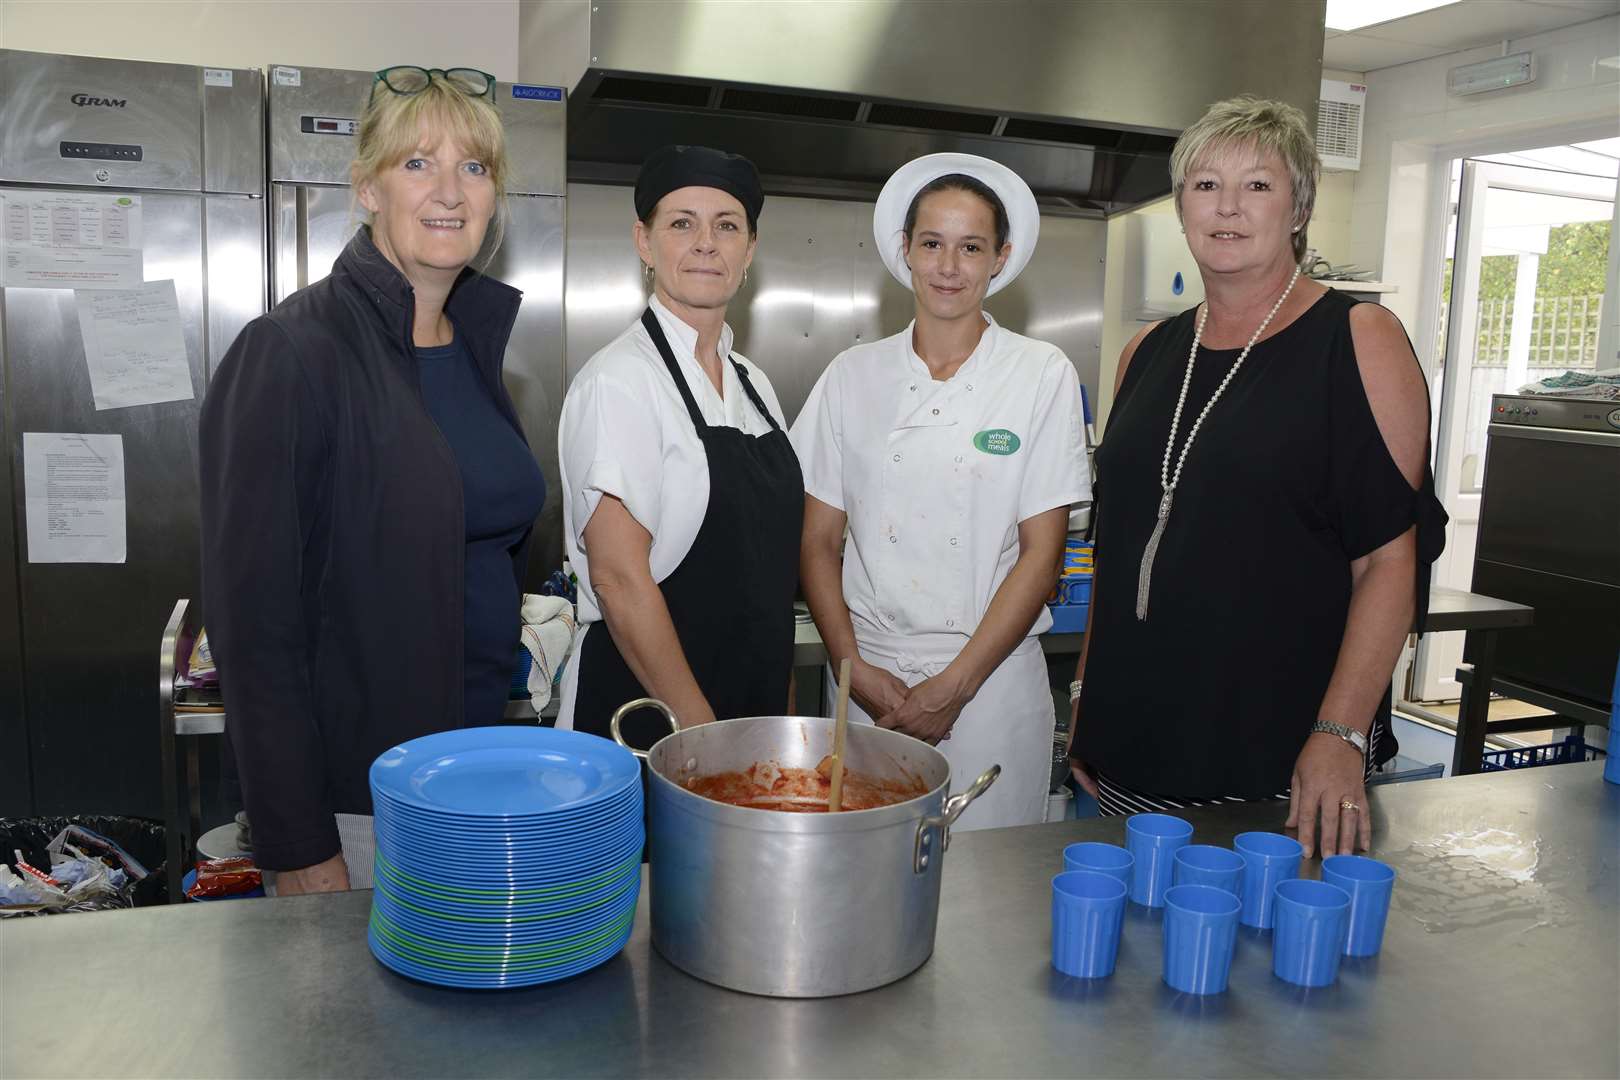 Once the kids have worked up an appetite staying active, Whole School Meals will be dishing up hot lunches